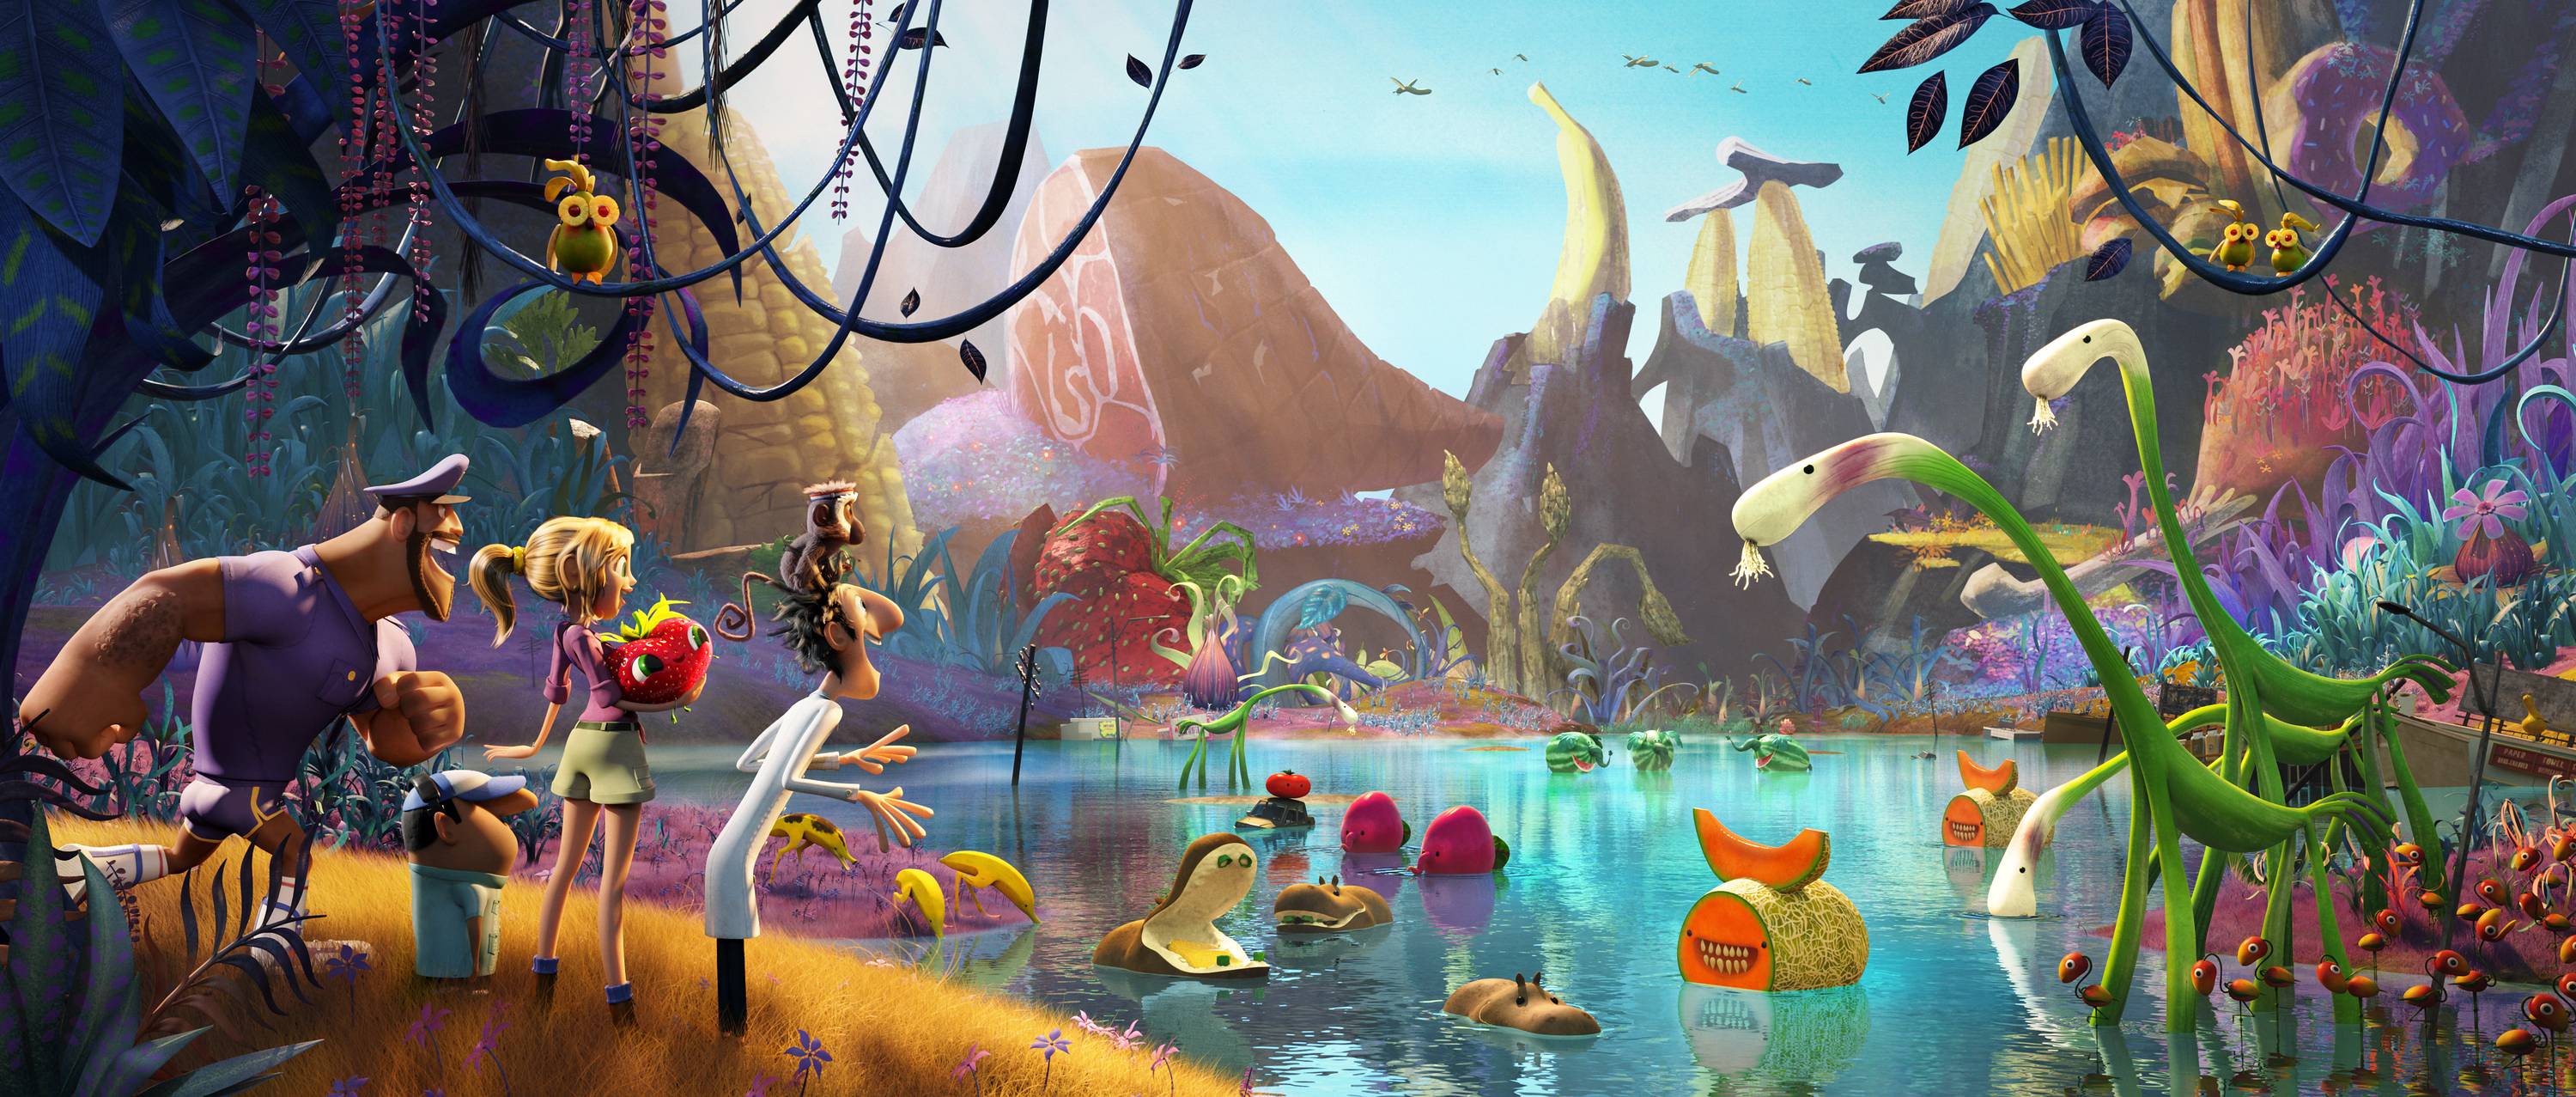 Wallpapers cartoon comedy Cloudy with a Chance of Meatballs 2 on the desktop